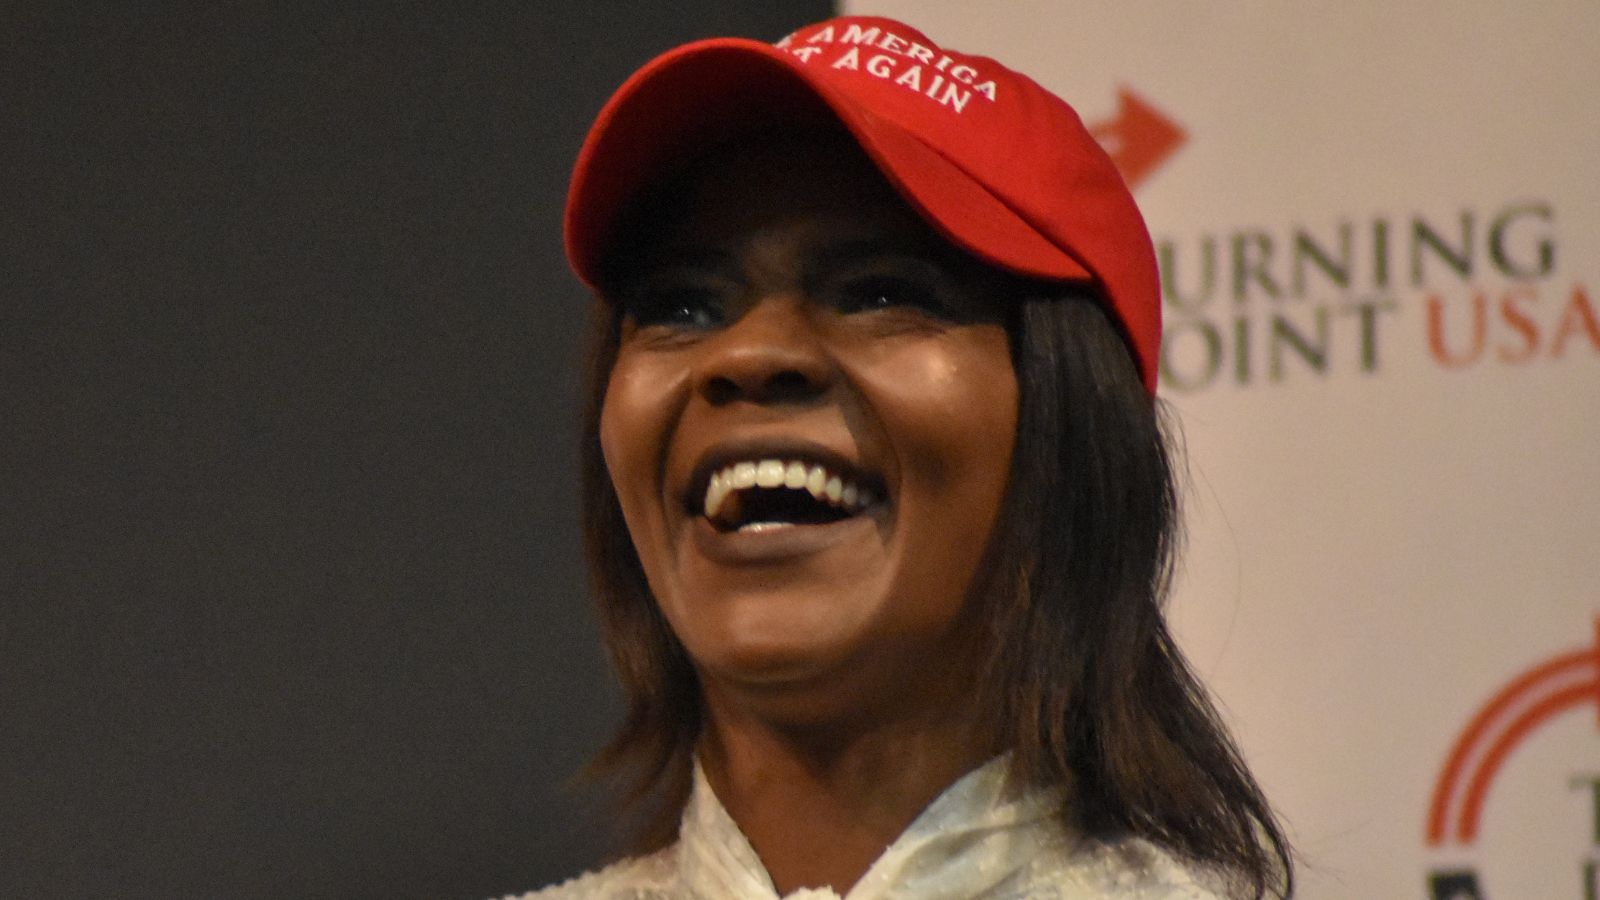 “Hateful and Morally Obtuse” – Conservative Think Tank Hits Out at Candace Owens’ “Ignorant” Remarks